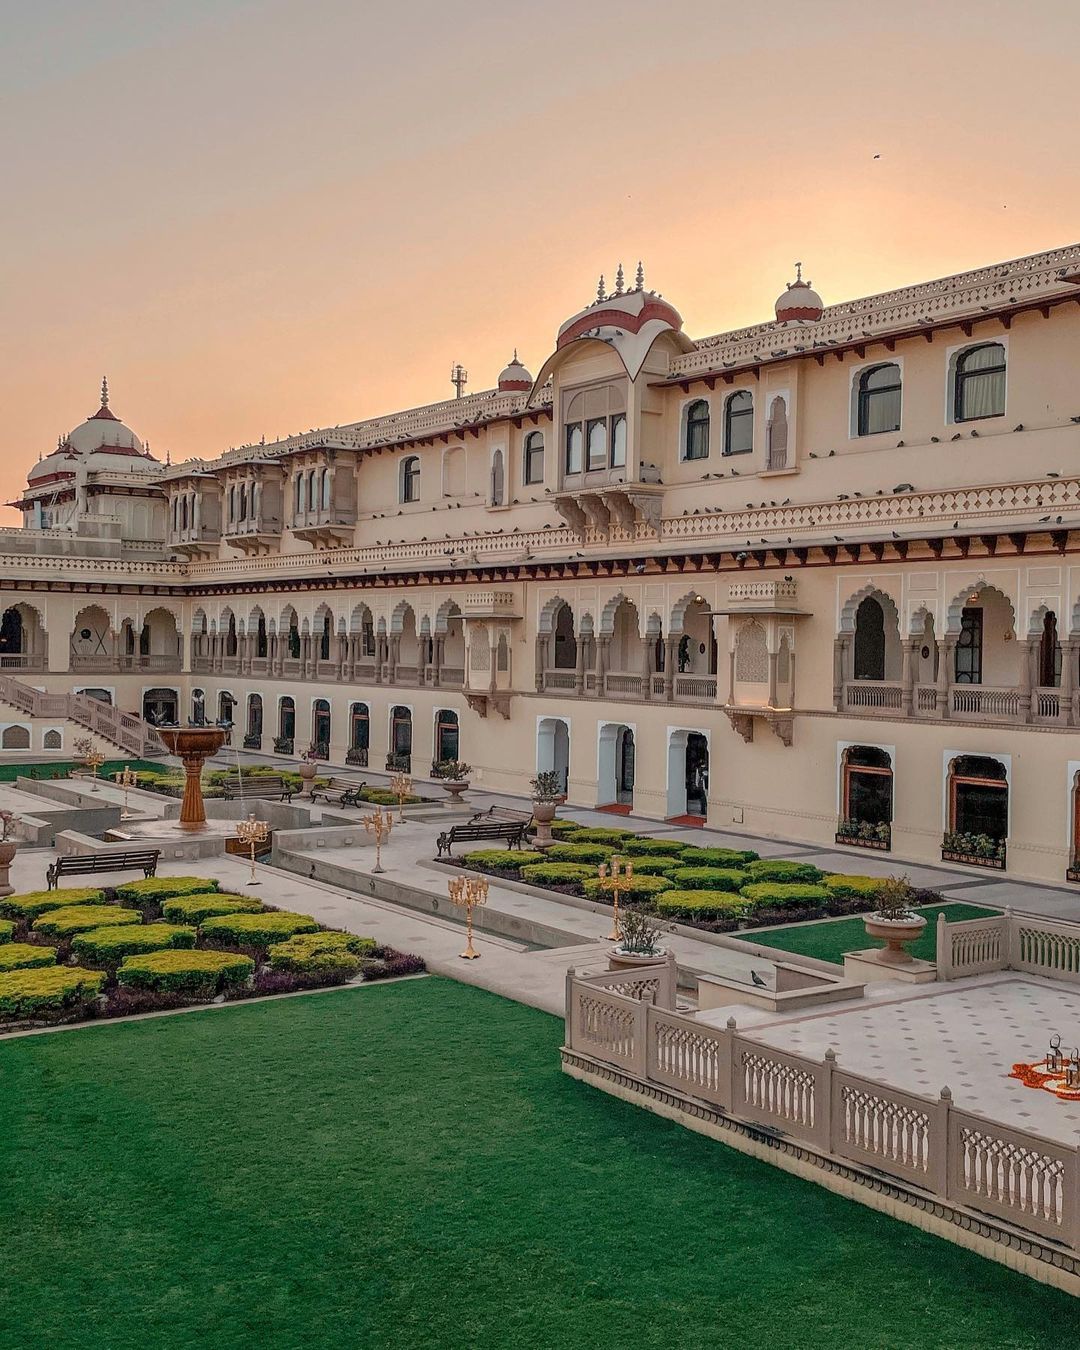 Rambagh place in jaipur